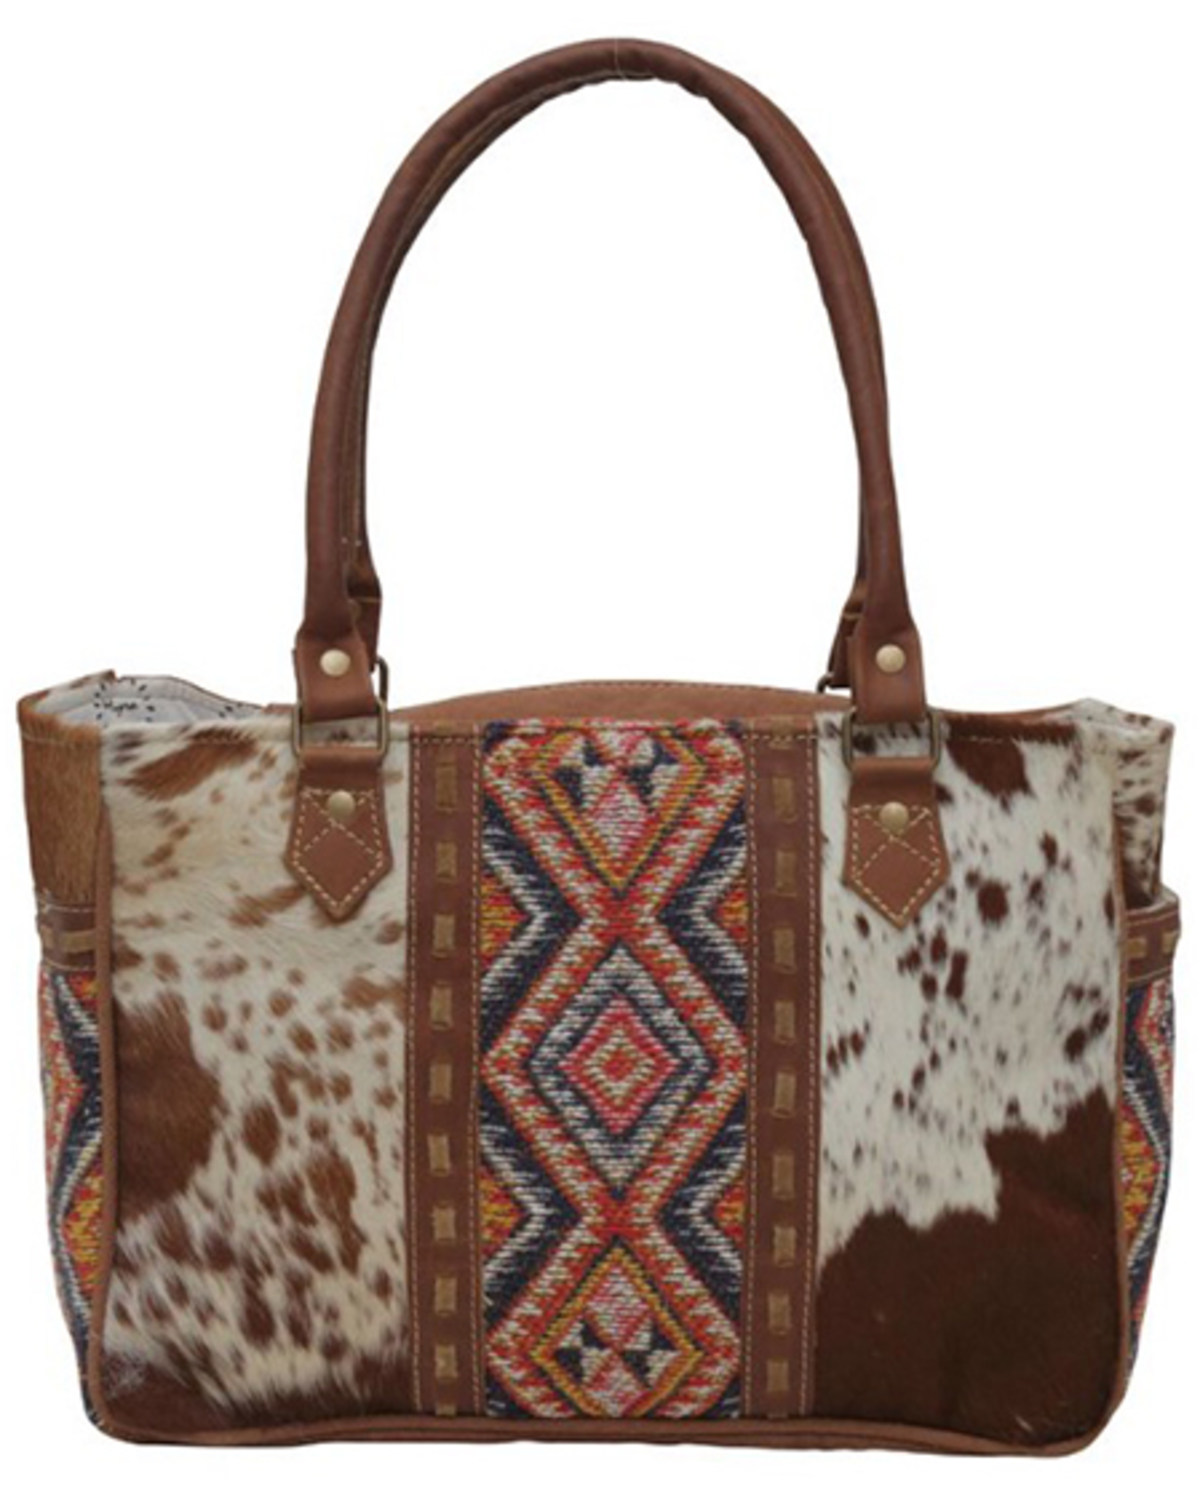 Myra Bag Women's Cowhide Embroidery Tote